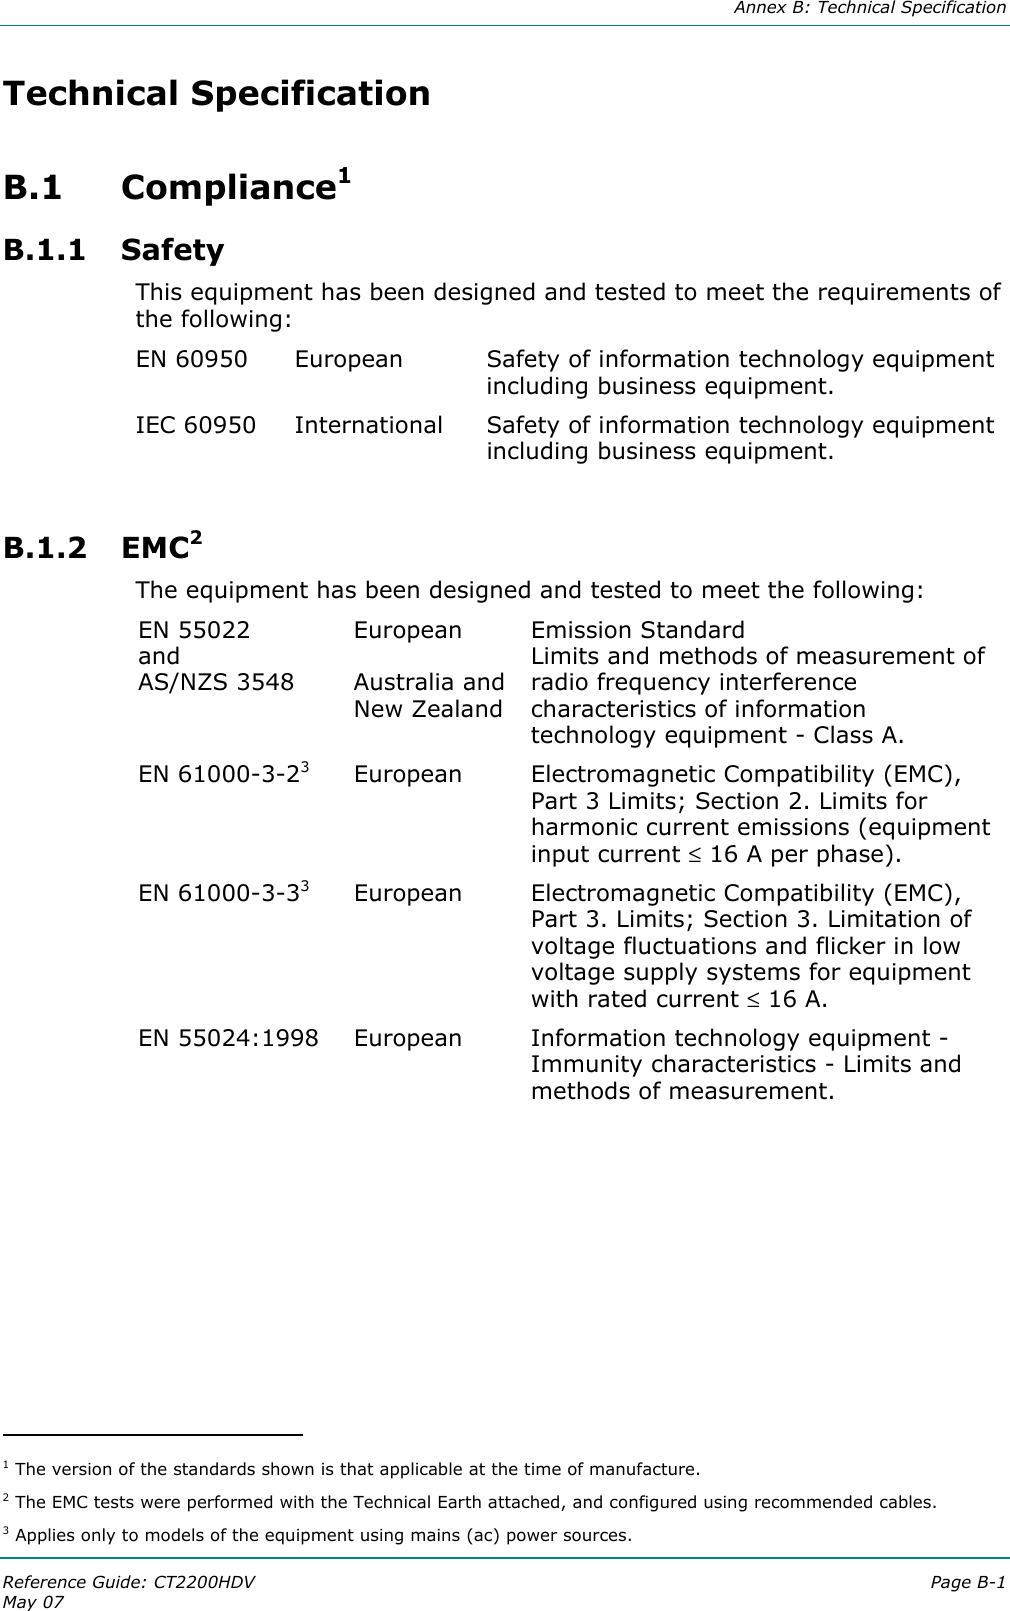  Annex B: Technical Specification Reference Guide: CT2200HDV  Page B-1 May 07   Technical Specification  B.1  Compliance1  B.1.1  Safety This equipment has been designed and tested to meet the requirements of the following:  EN 60950  European  Safety of information technology equipment including business equipment. IEC 60950  International  Safety of information technology equipment including business equipment.  B.1.2  EMC2 The equipment has been designed and tested to meet the following:  EN 55022  and AS/NZS 3548   European  Australia and New Zealand Emission Standard Limits and methods of measurement of radio frequency interference characteristics of information technology equipment - Class A. EN 61000-3-23  European  Electromagnetic Compatibility (EMC), Part 3 Limits; Section 2. Limits for harmonic current emissions (equipment input current ≤ 16 A per phase). EN 61000-3-33  European  Electromagnetic Compatibility (EMC), Part 3. Limits; Section 3. Limitation of voltage fluctuations and flicker in low voltage supply systems for equipment with rated current ≤ 16 A. EN 55024:1998   European  Information technology equipment - Immunity characteristics - Limits and methods of measurement.                                             1 The version of the standards shown is that applicable at the time of manufacture. 2 The EMC tests were performed with the Technical Earth attached, and configured using recommended cables. 3 Applies only to models of the equipment using mains (ac) power sources. 